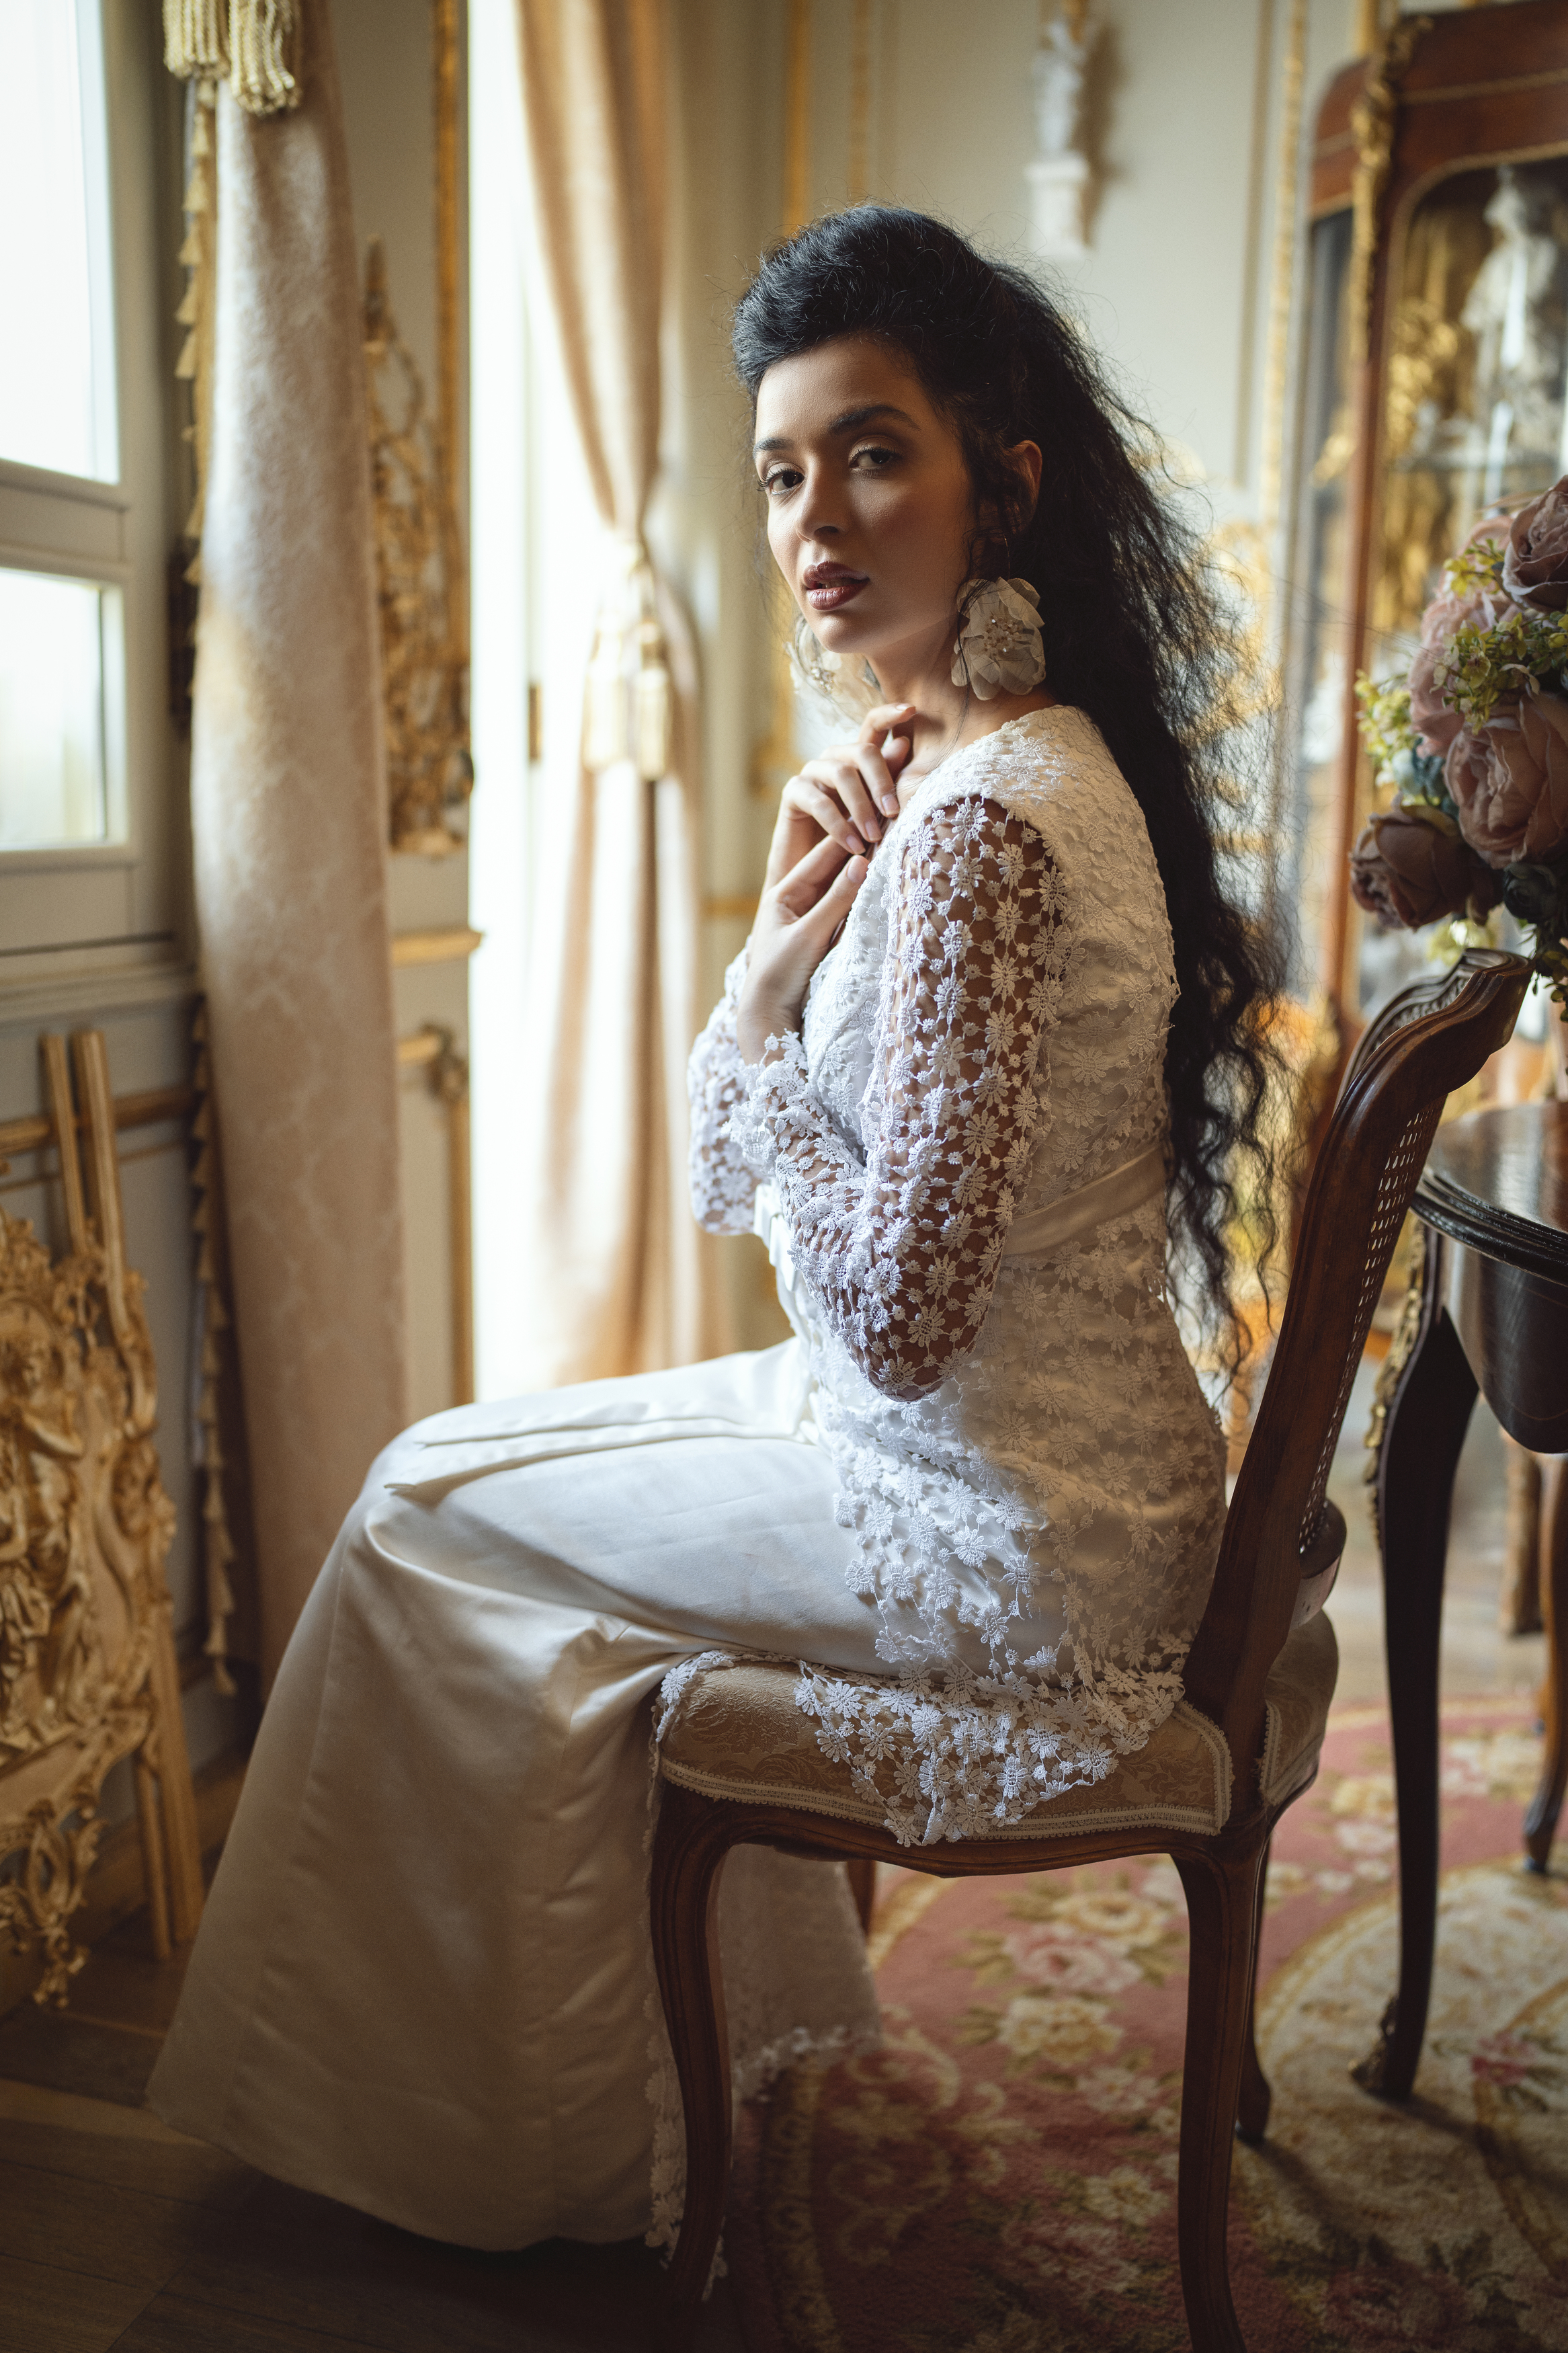 ball gown, beautiful woman, carpet, chair, earrings, elegance, fashion, femininity, flowers, grace, human face, indoors, lifestyles, looking at camera, louis XV, one person, portrait, retro, rococo, sensuality, side view, sitting, table, vintage, windows, Alex Tsarfin